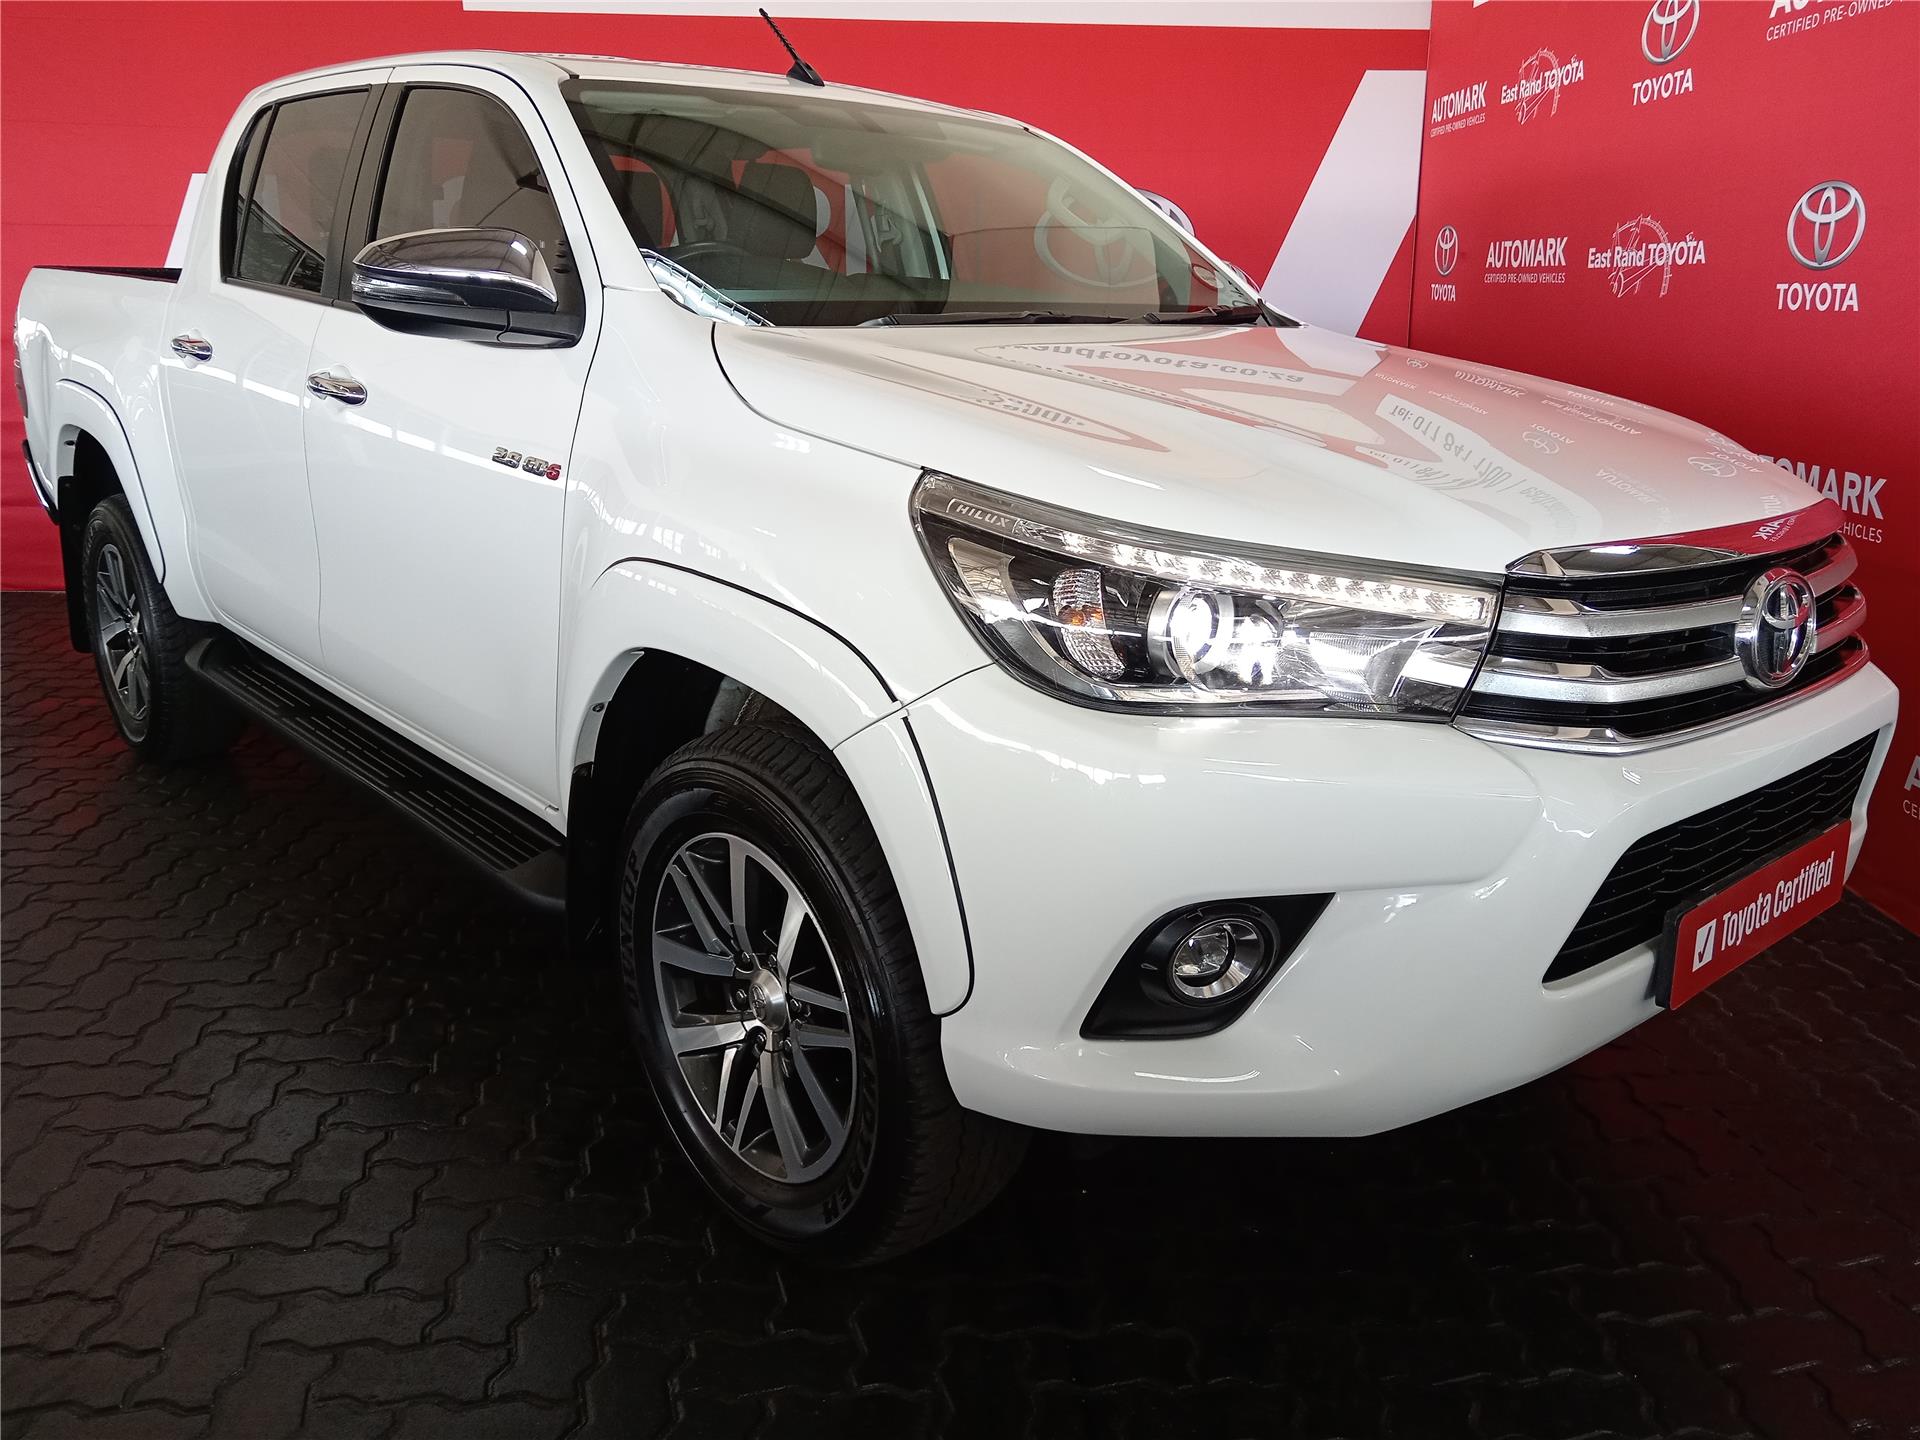 2018 Toyota Hilux Double Cab  for sale - 150720/1